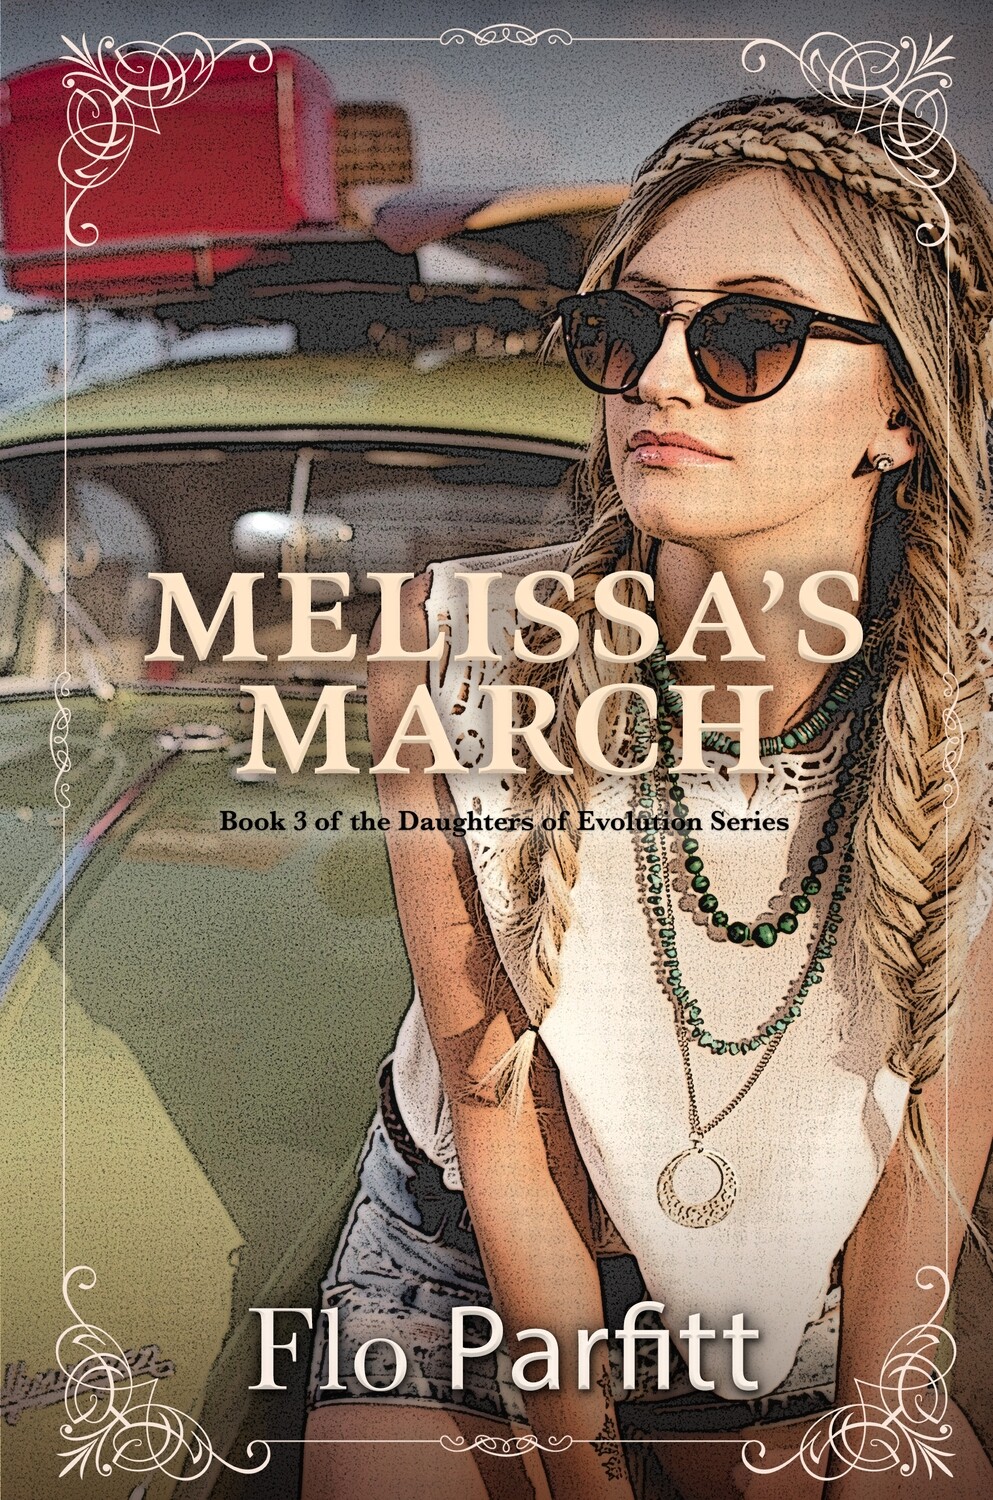 Melissa's March: A Daughters of Evolution Novel by Flo Parfitt